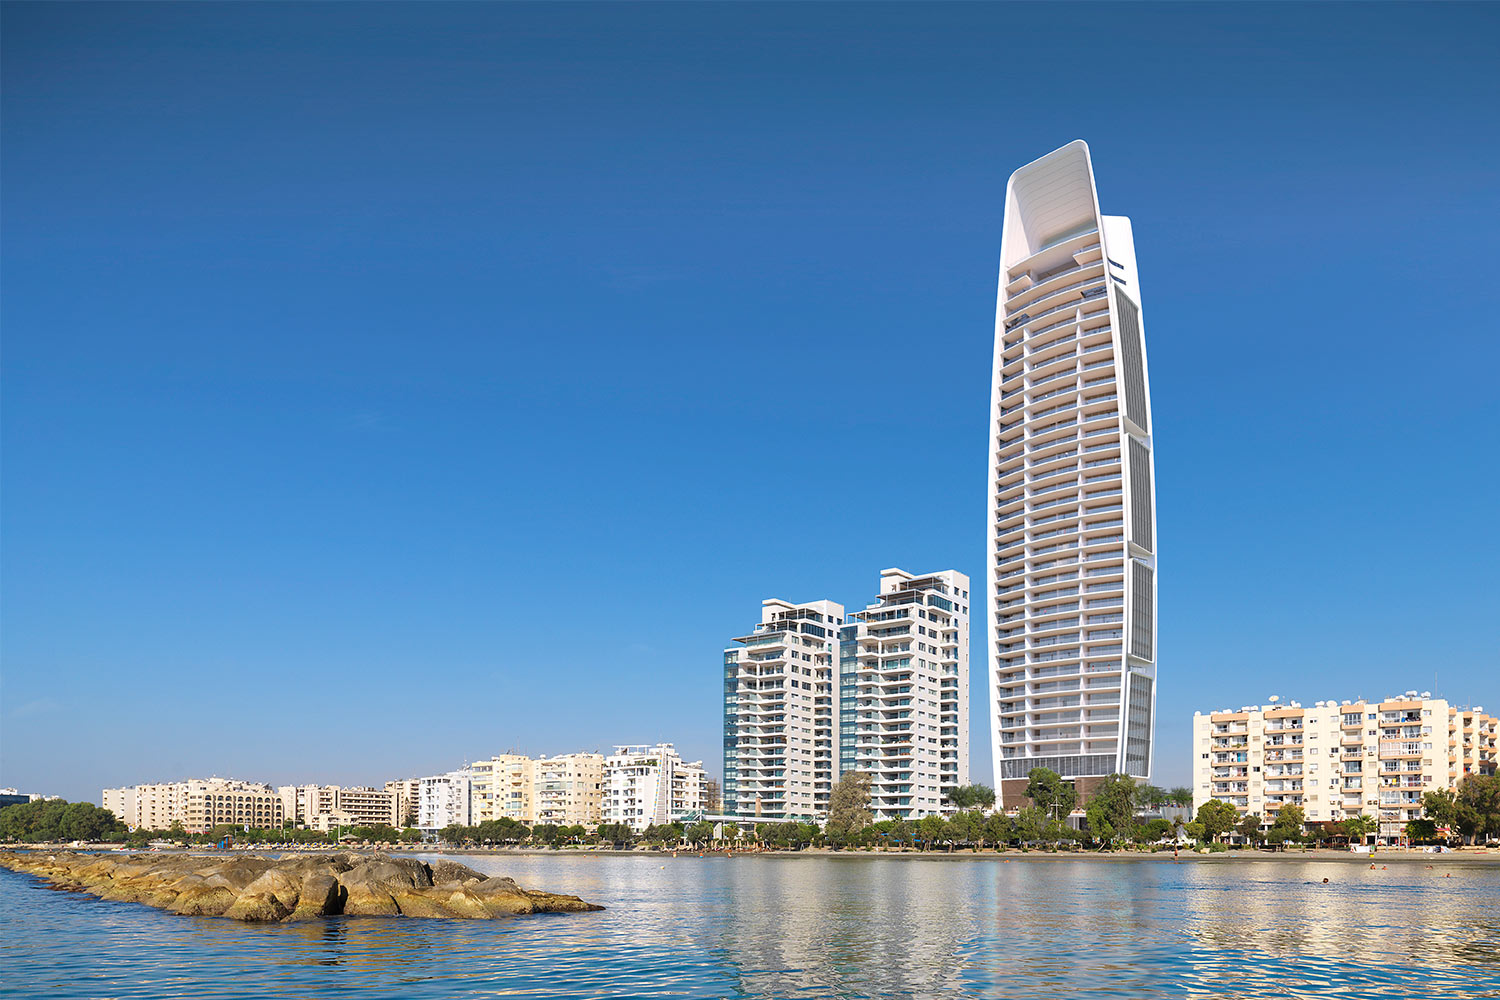 Tallest building of Cyprus